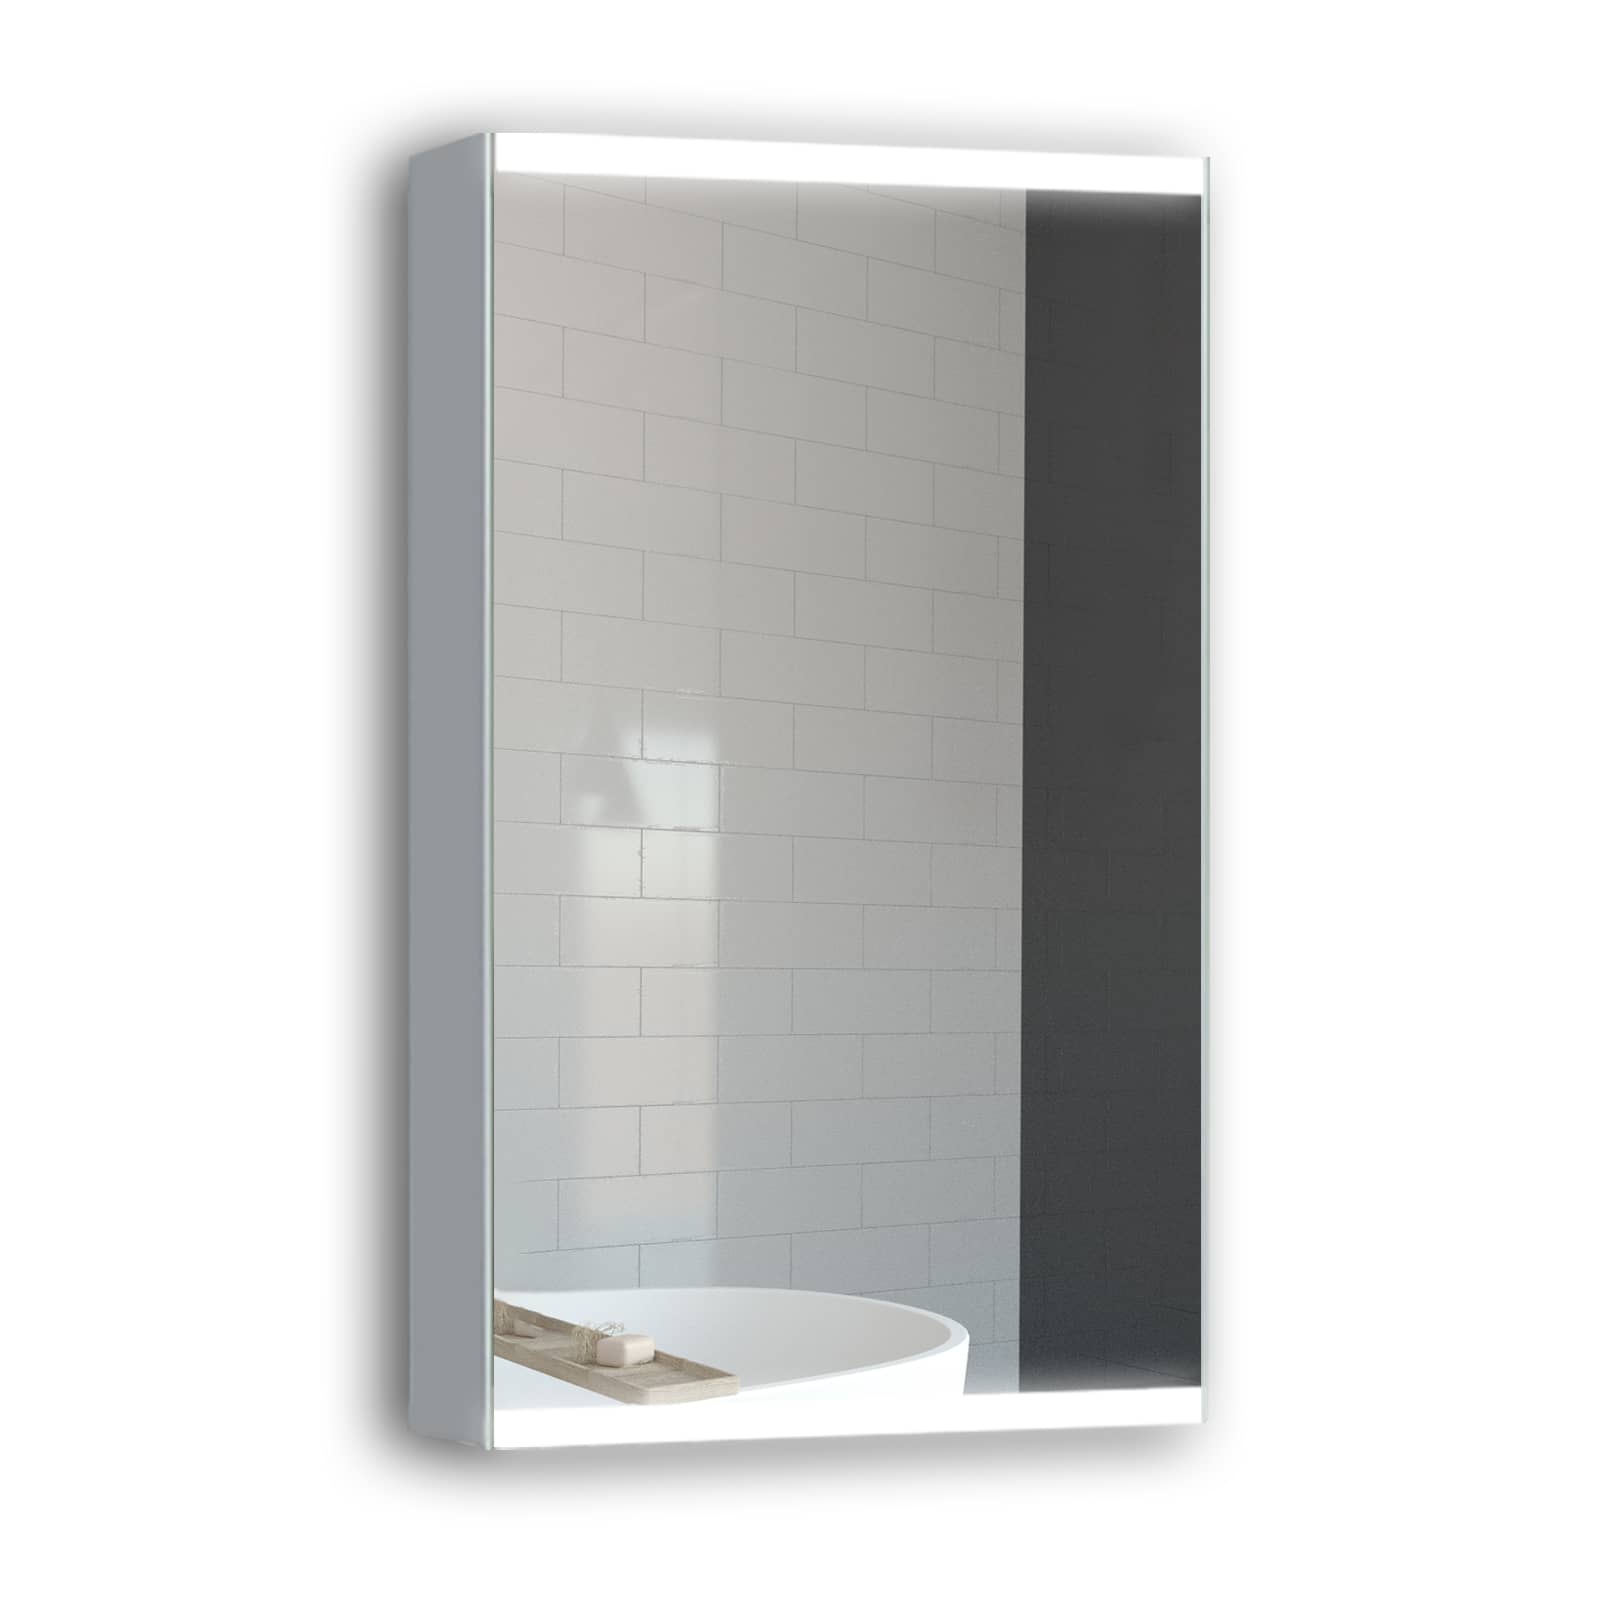 CASA15 in. W x 26 in. H x 5 in. D Frameless Recessed or Surface-Mount 